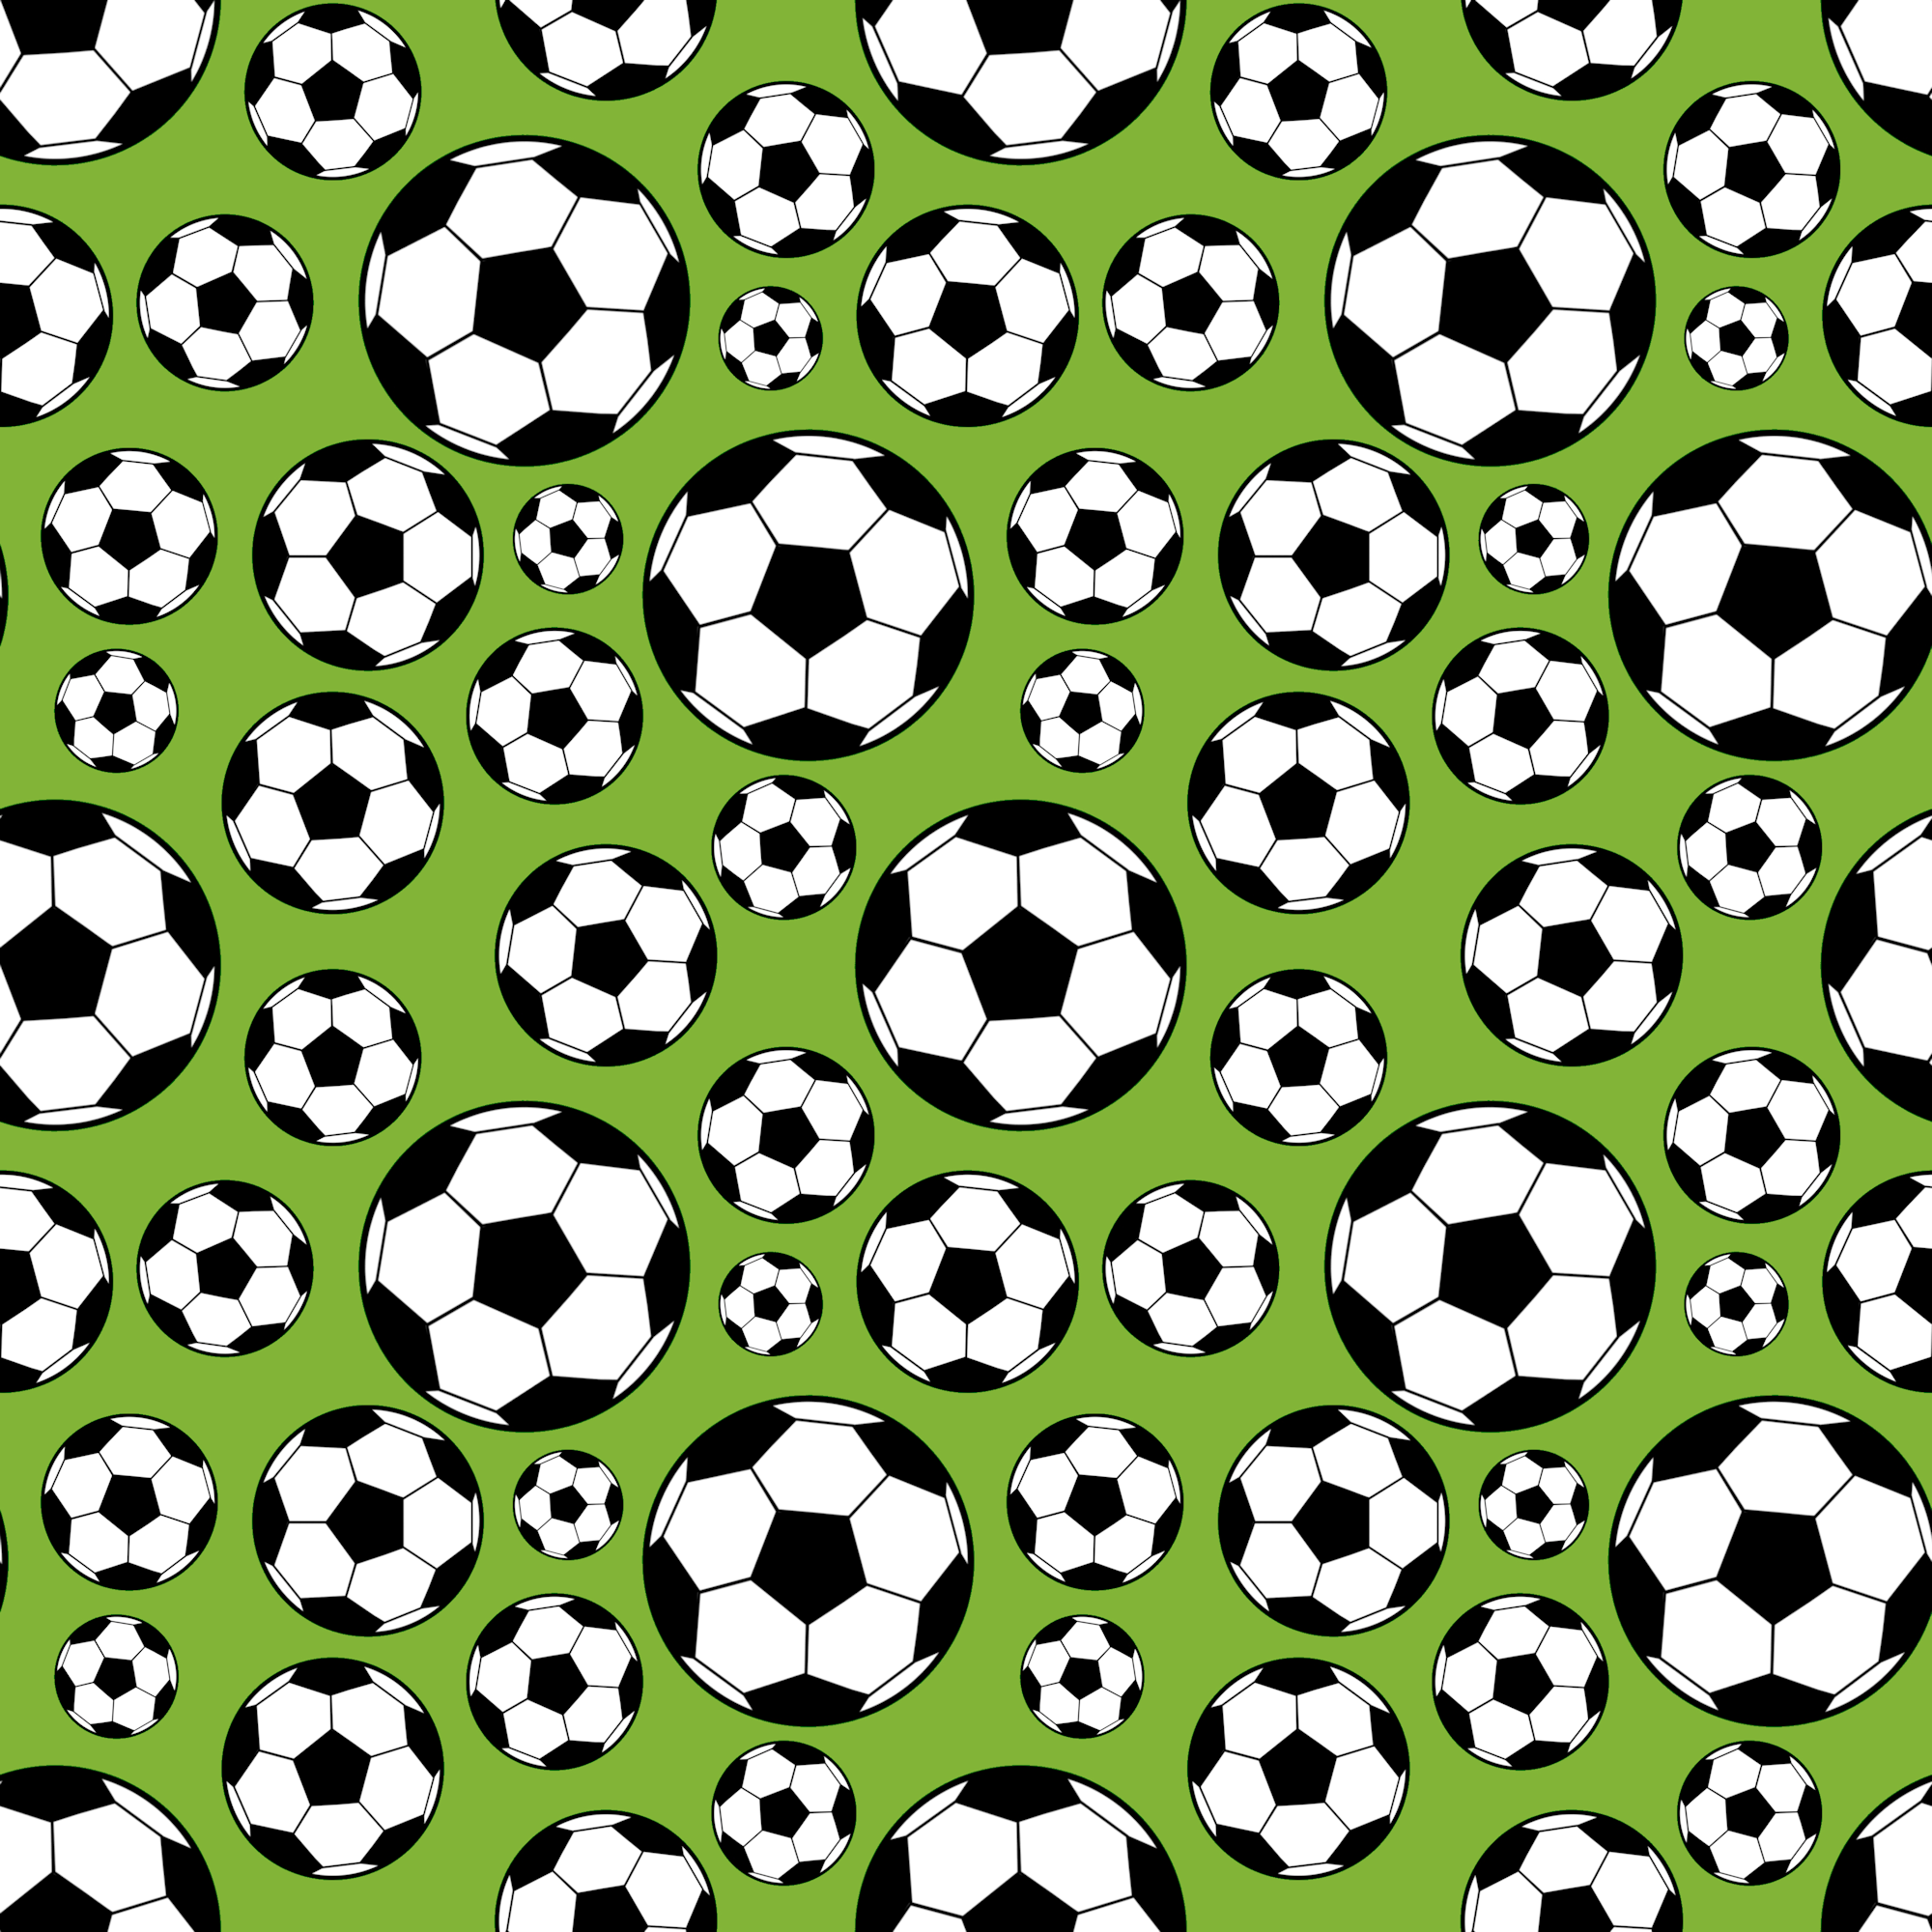 Sports Beat Collection Soccer Balls 12 x 12 Double-Sided Scrapbook Paper by SSC Designs